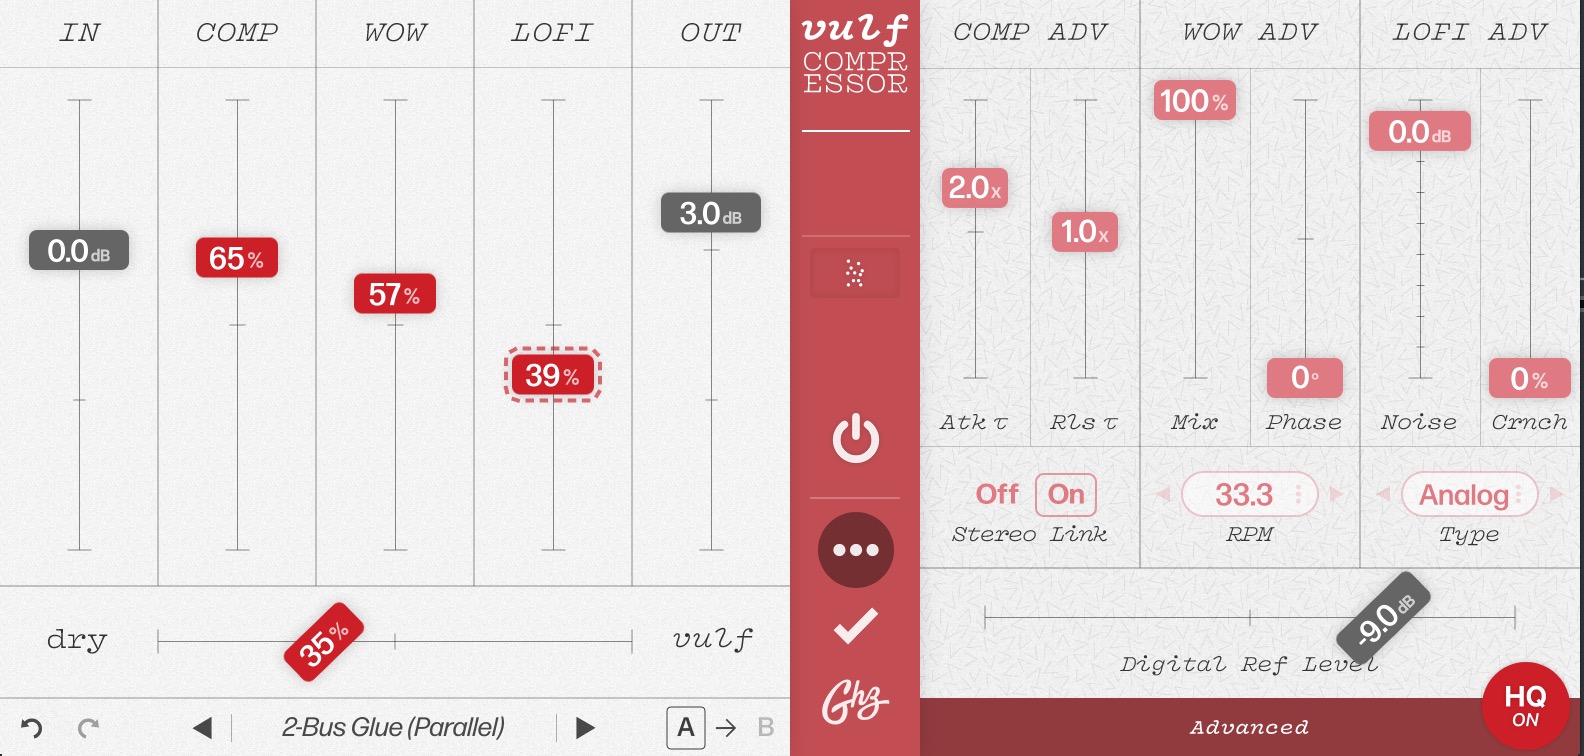 Vulf Compressor by Goodhertz Review